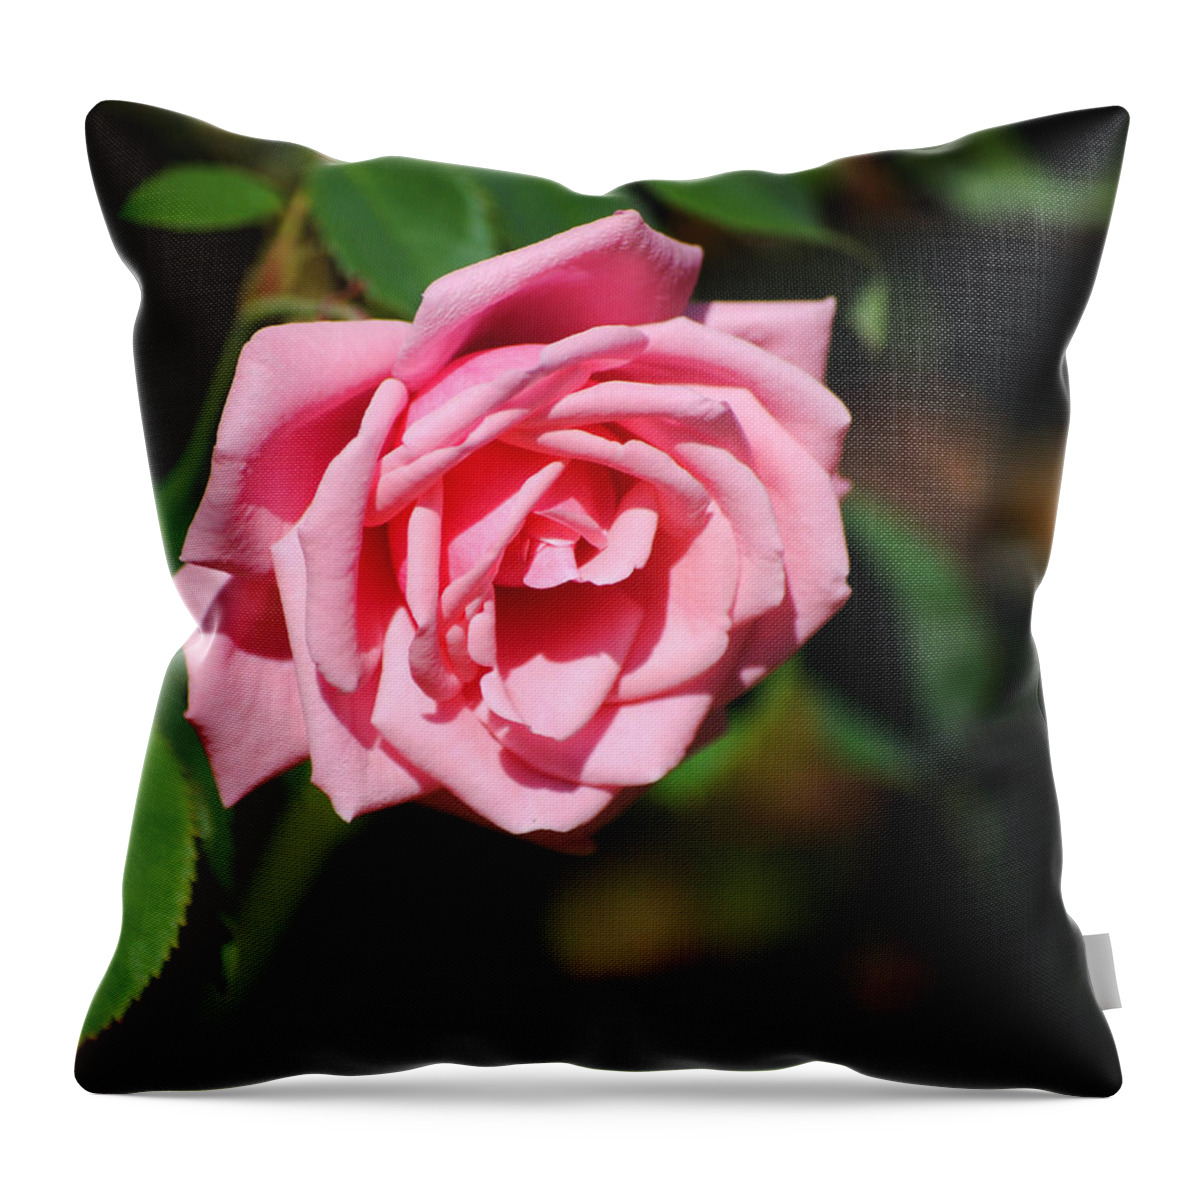 Autumn Throw Pillow featuring the photograph The Last Rose by Jai Johnson